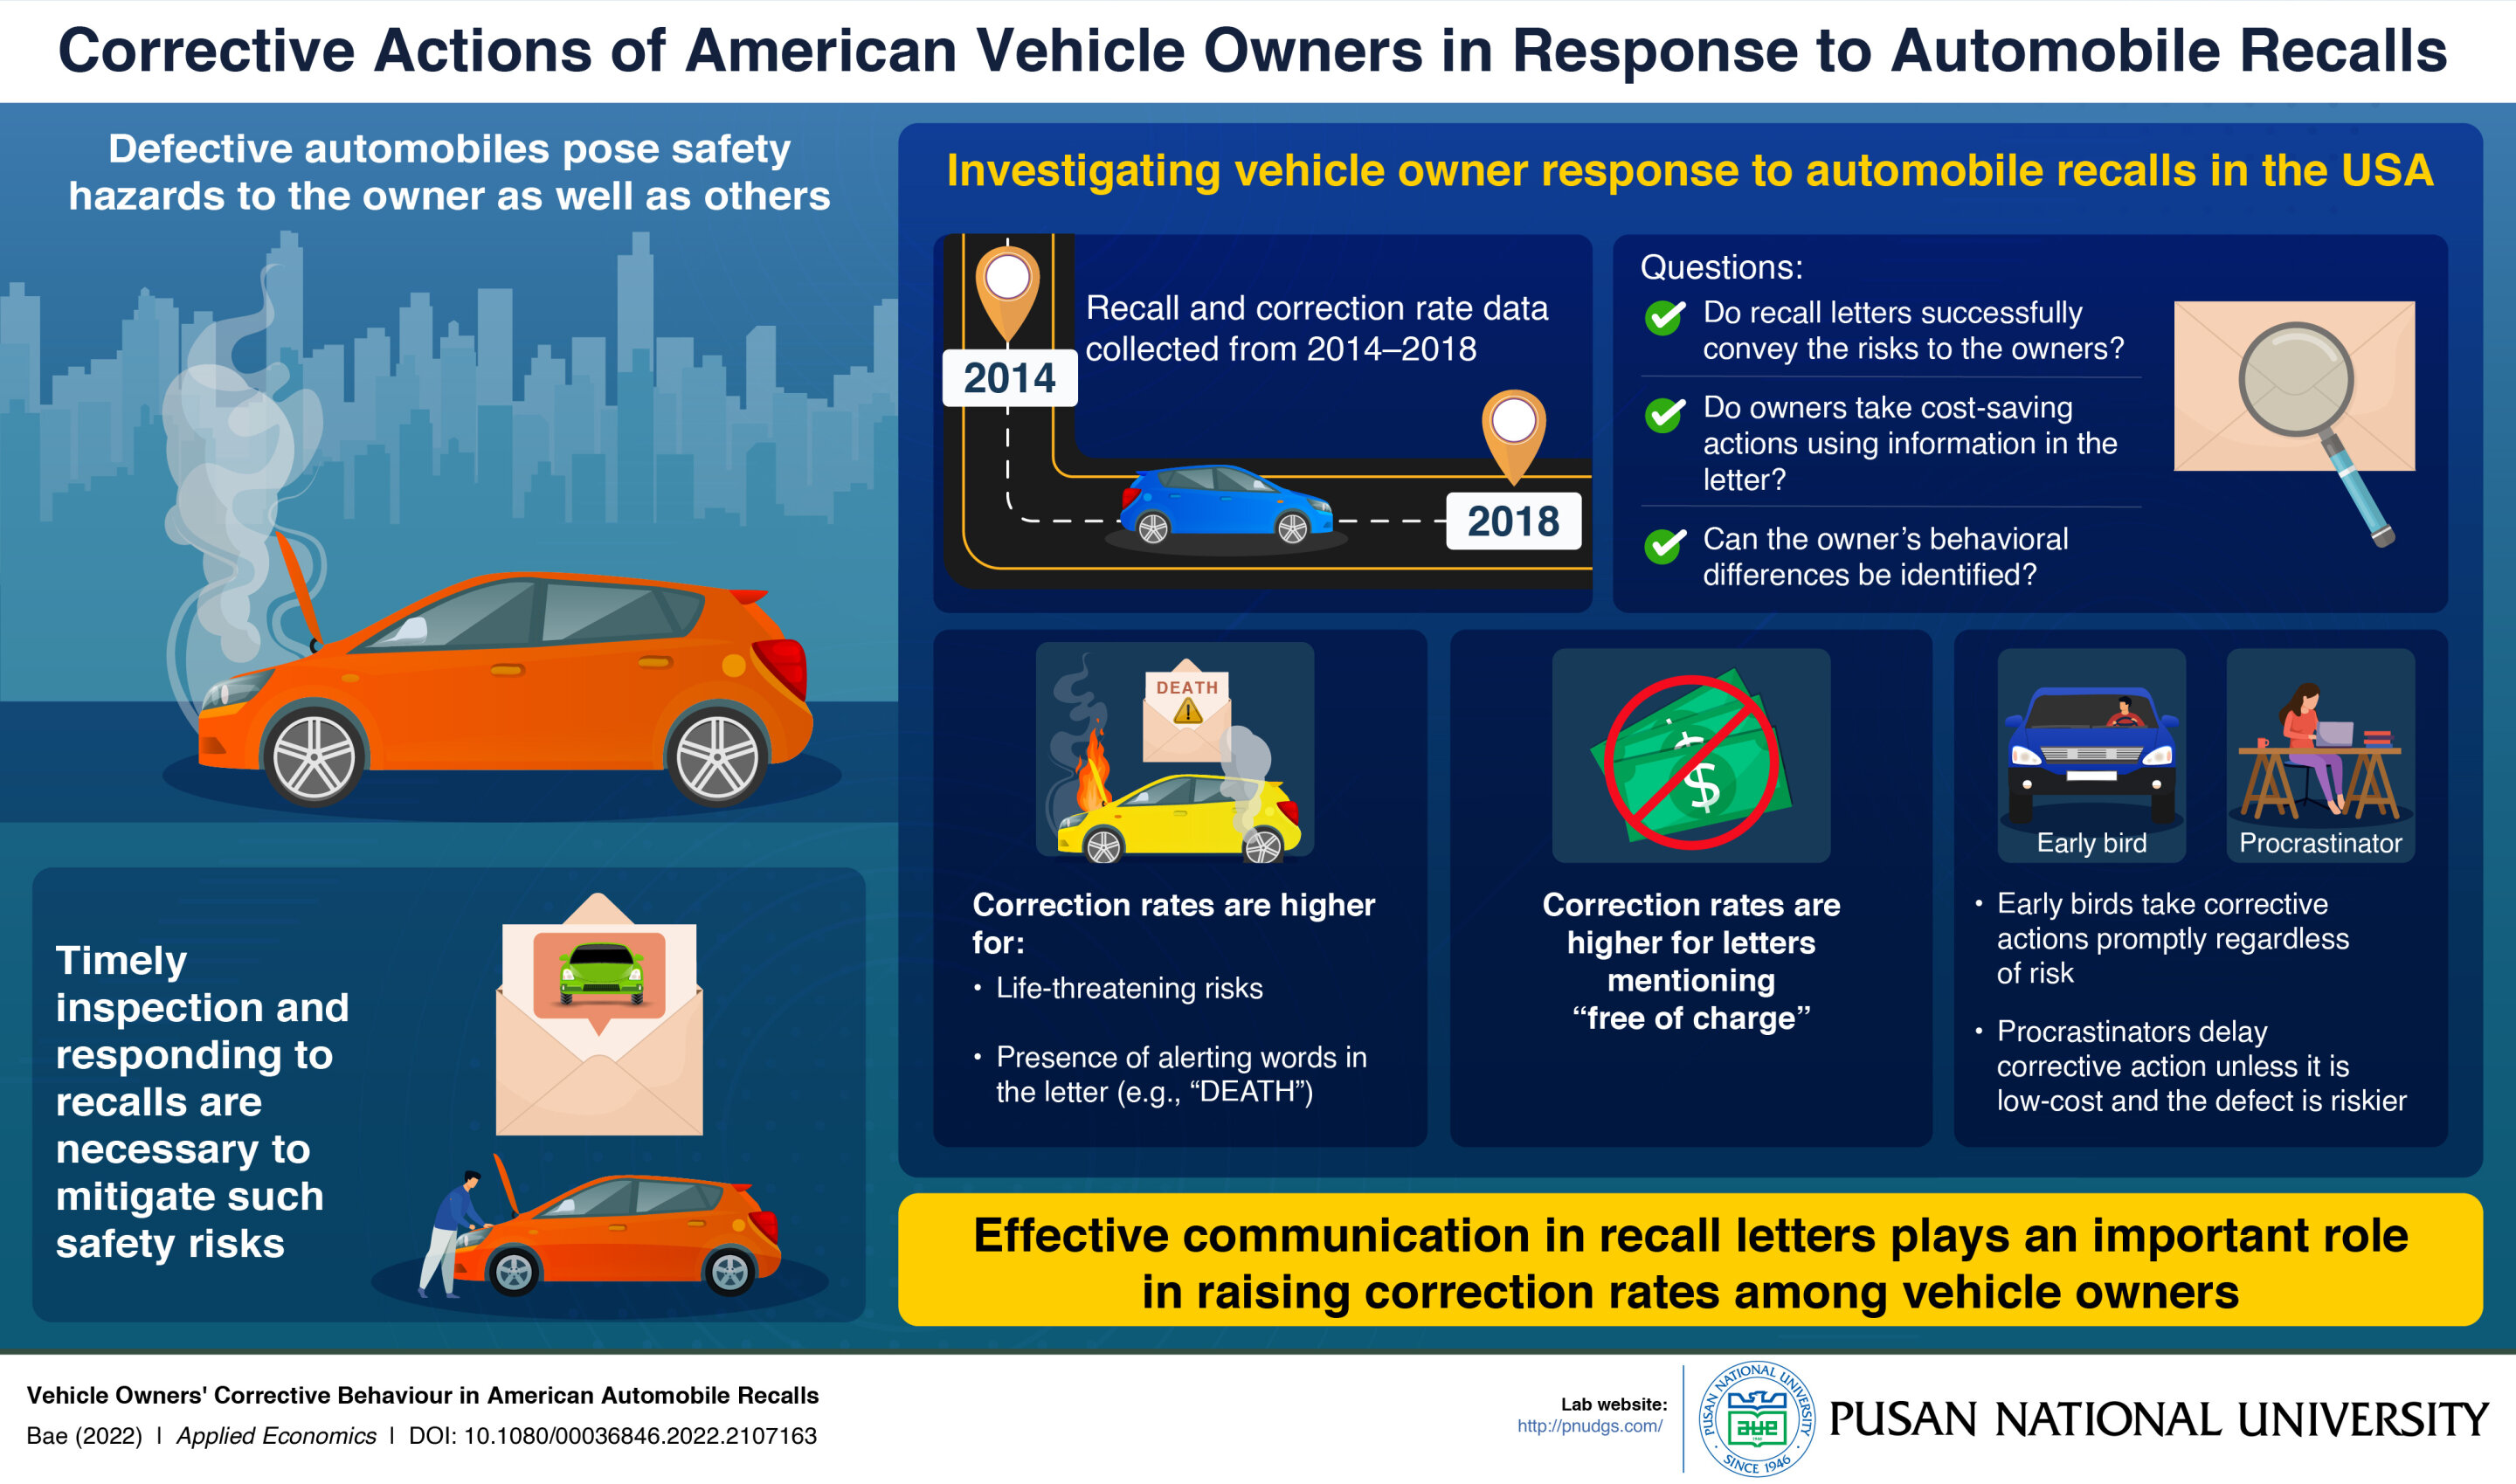 Effective communication in automobile recalls encourages corrective action among drivers